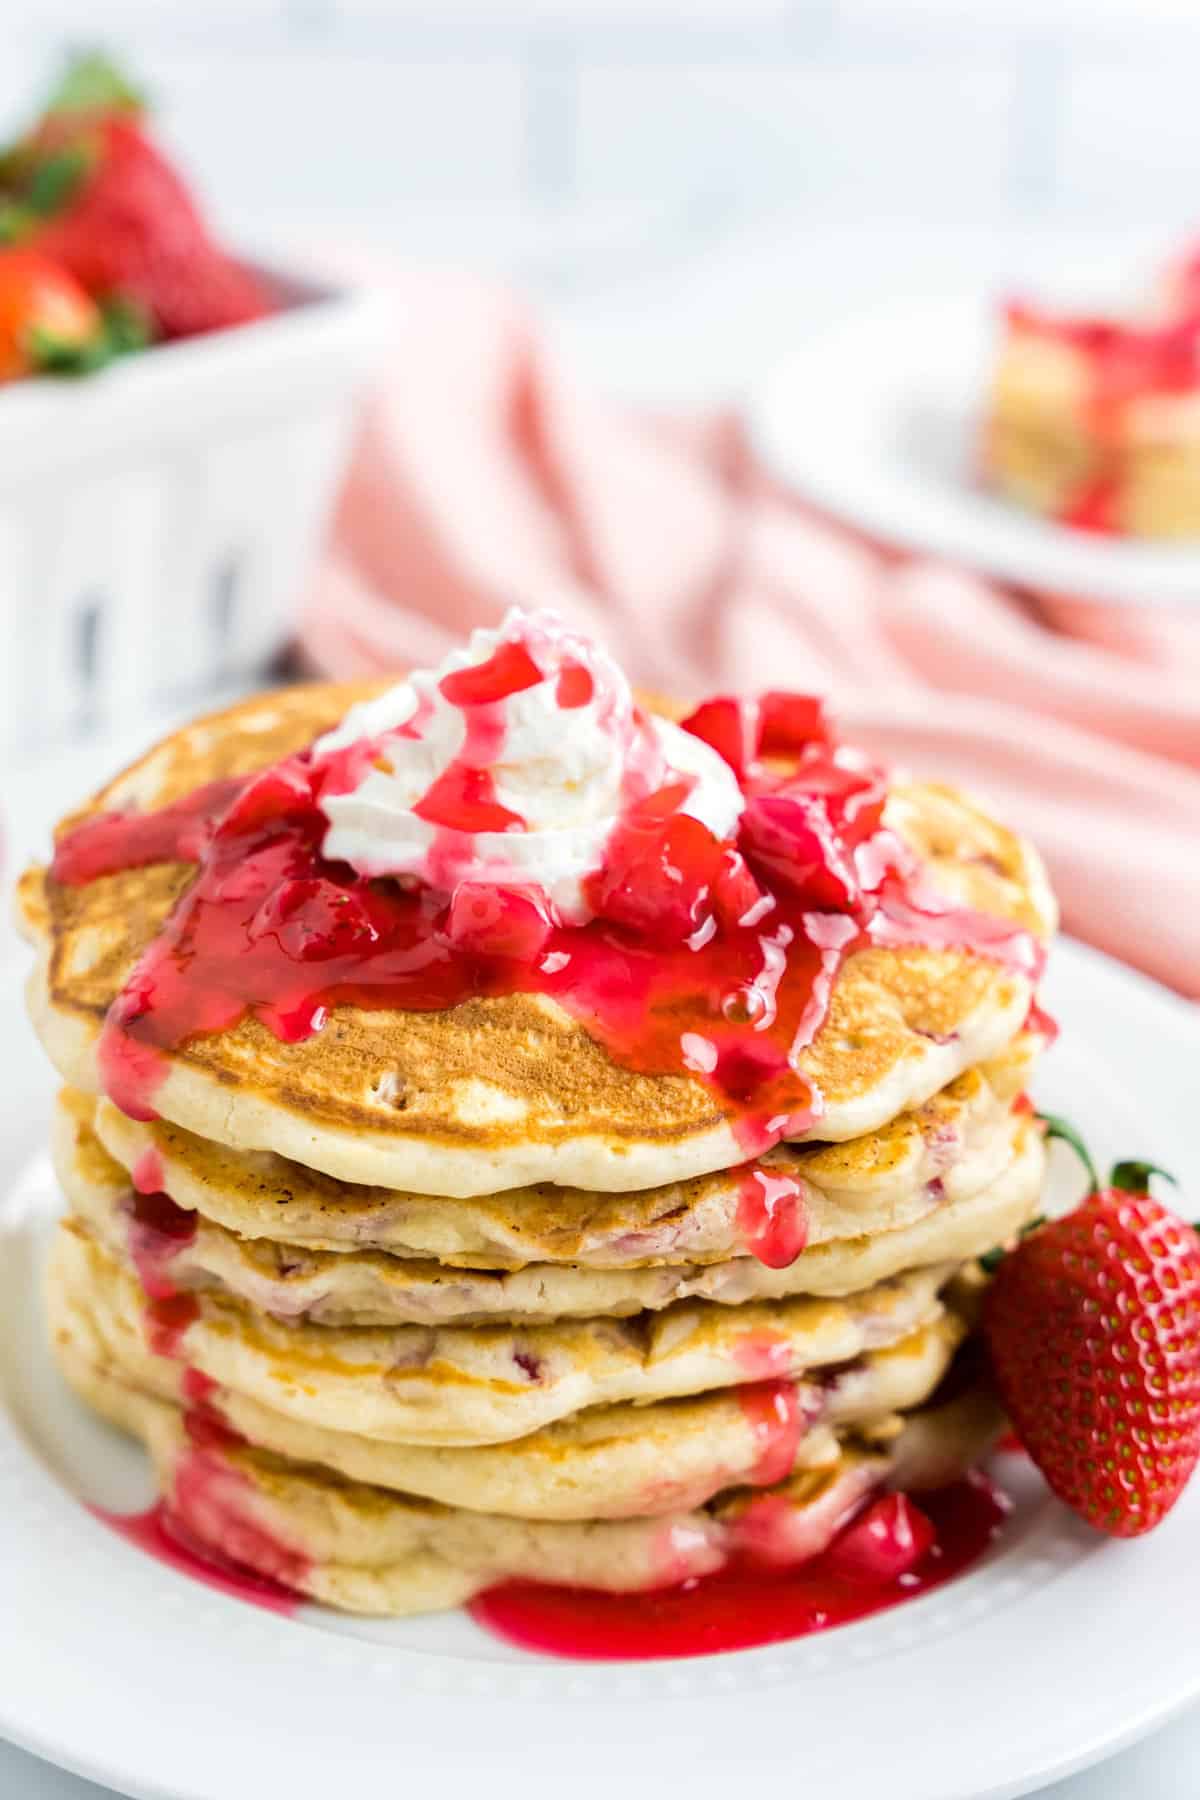 Strawberry Pancake Recipe on Plate Topped with Strawberry Syrup and Whipped Cream